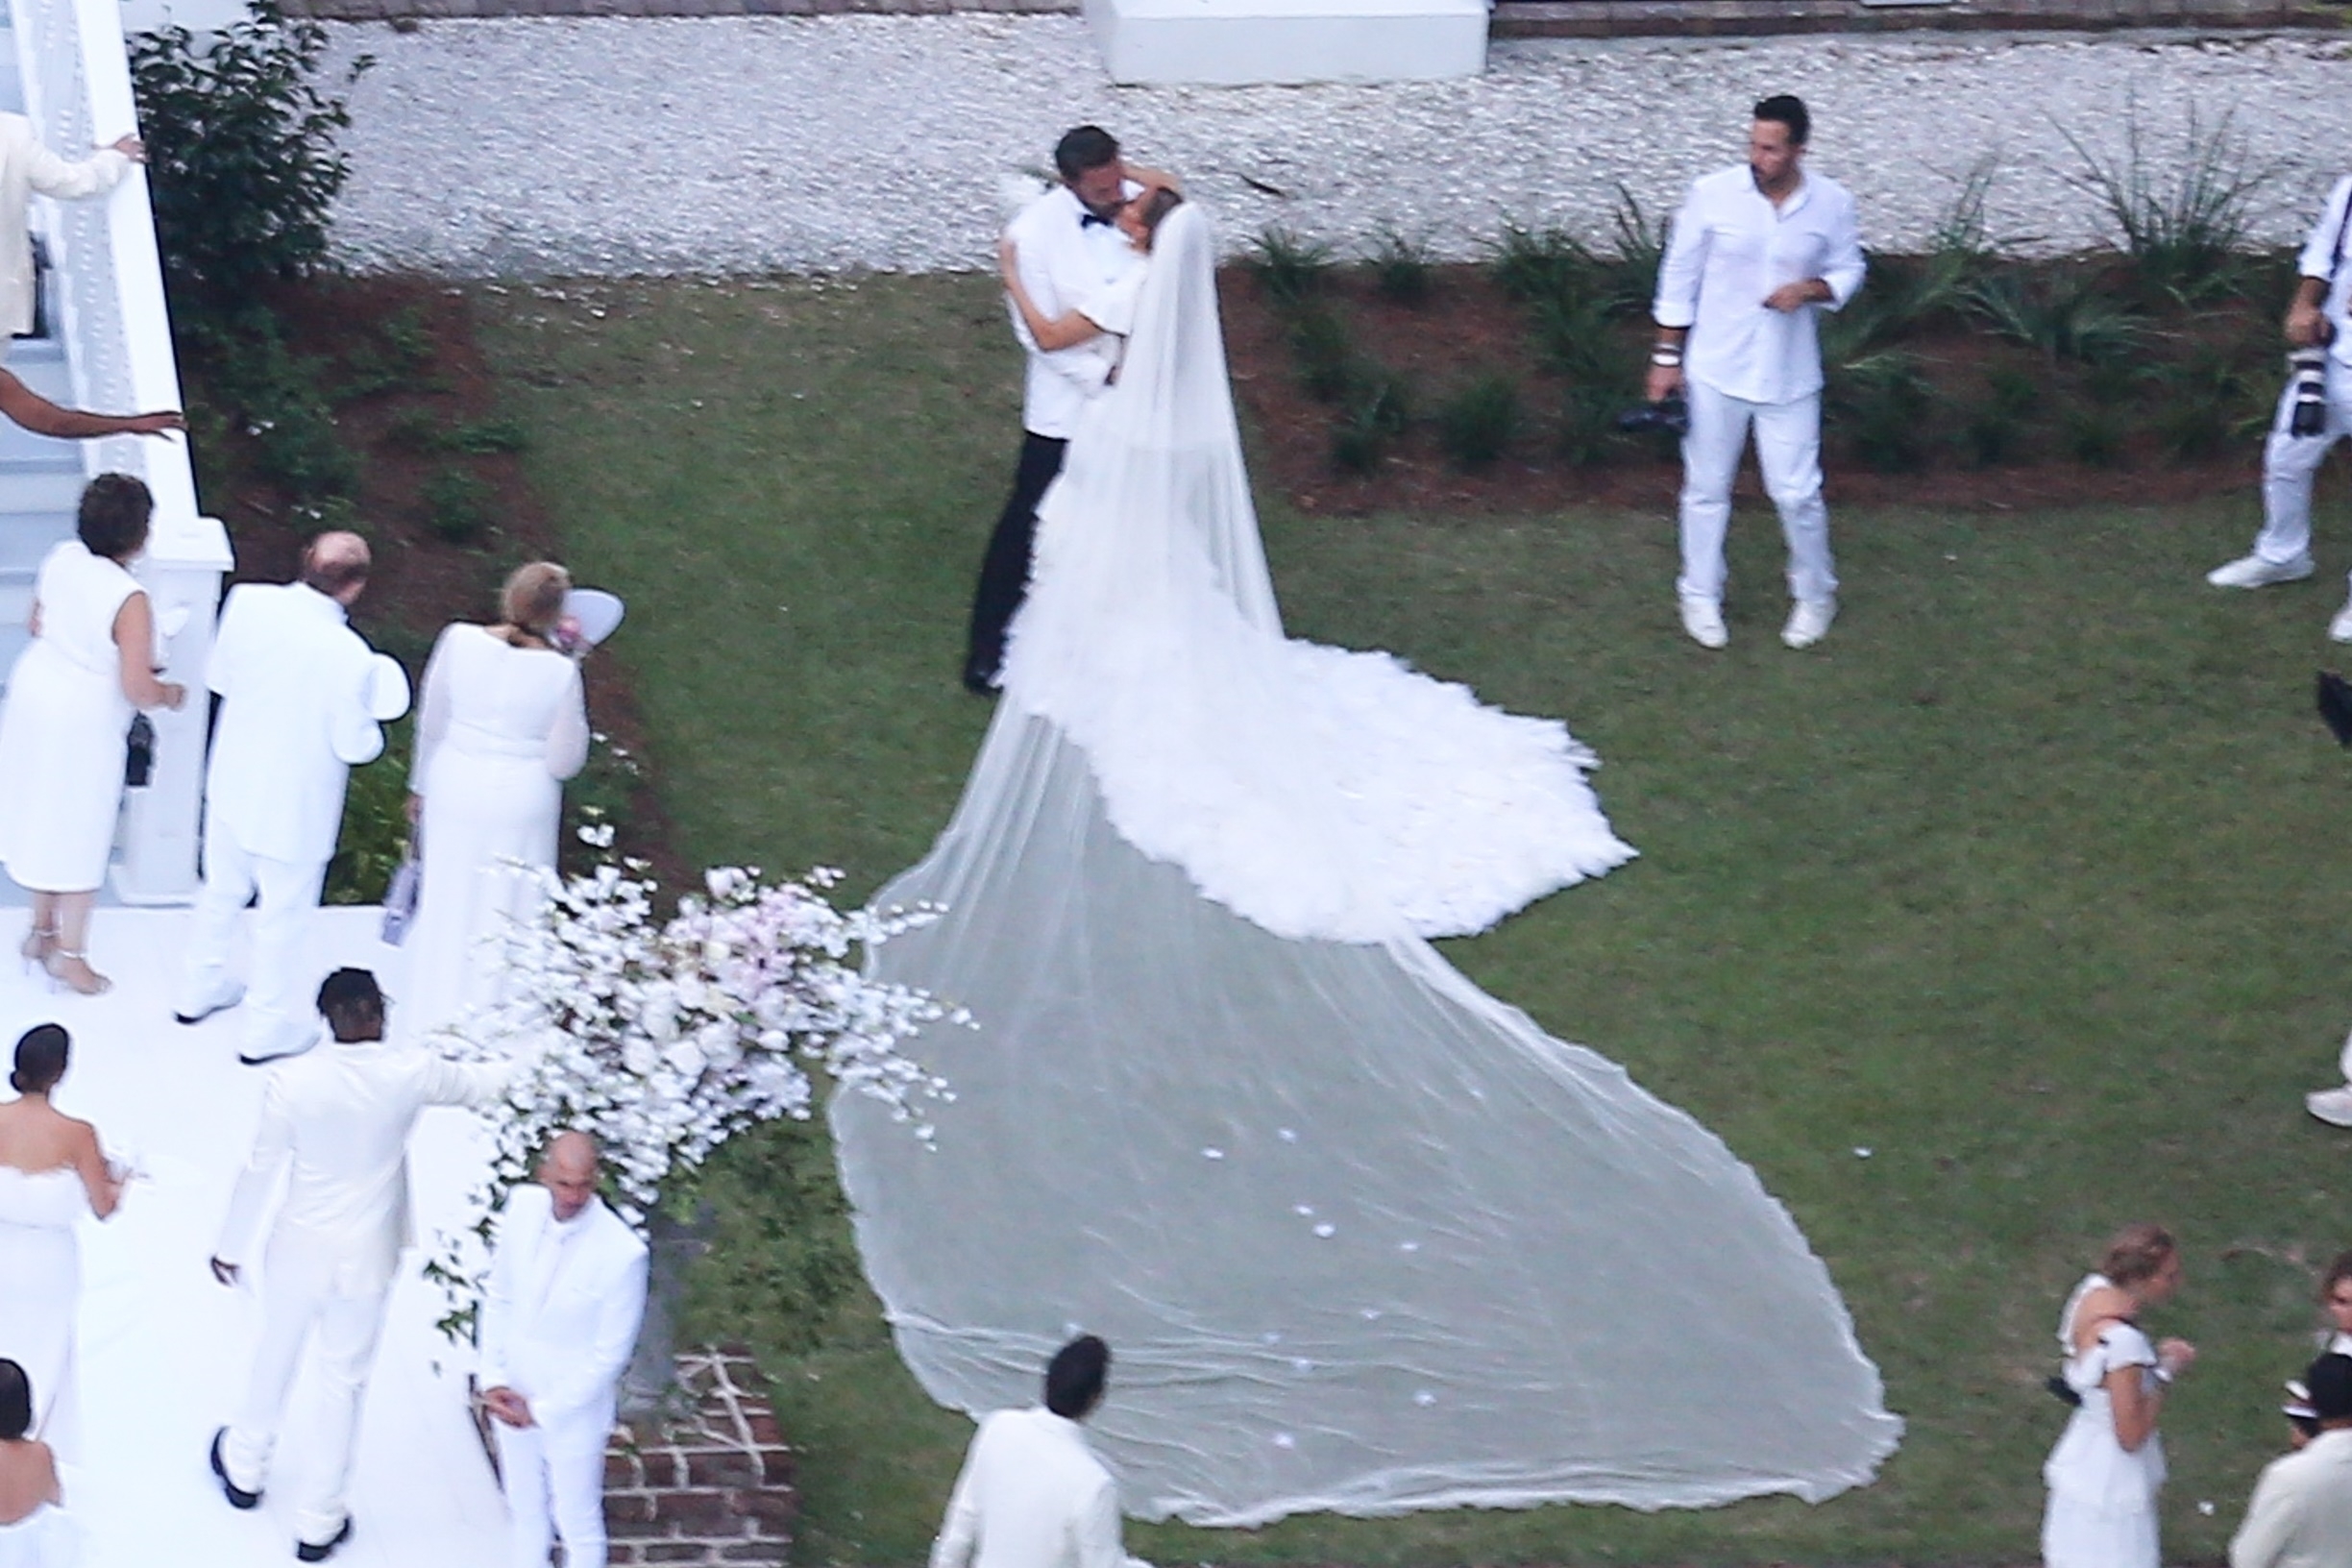 Jennifer Lopez wears a stunning white wedding dress as she celebrates her marriage to Ben Affleck, suitably dashing in a white jacket and black pants. The couple kissed and posed for pics around Bens $8million Georgia mansion on Saturday evening before spending the night celebrating their love and their union with family and a raft of A-list friends.